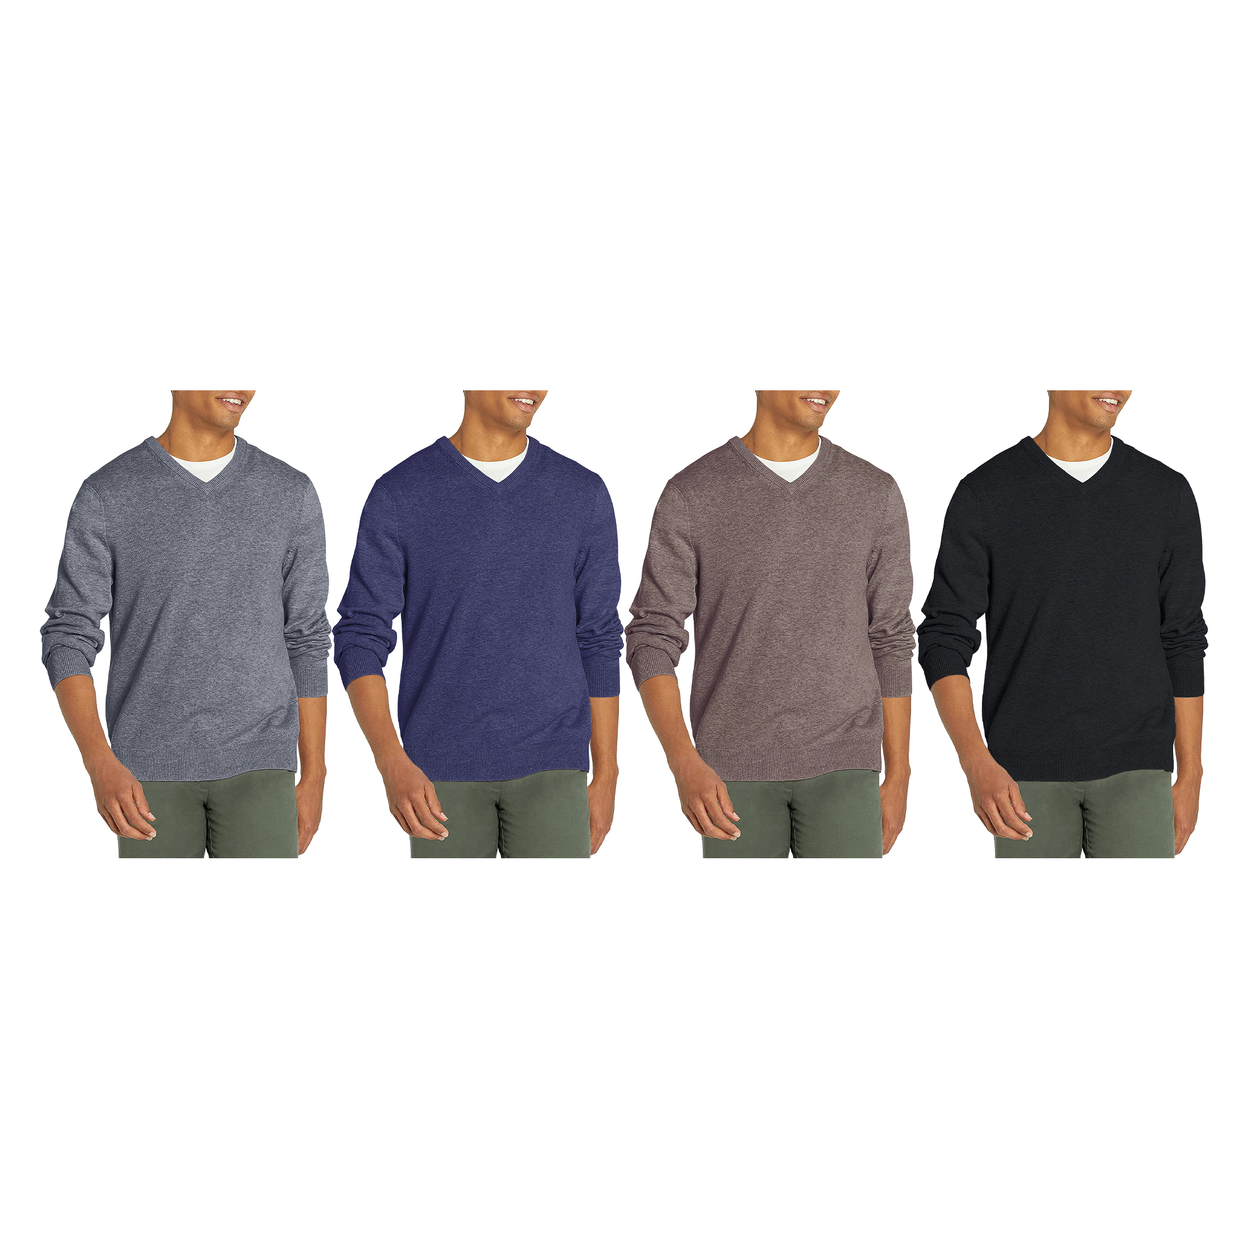 Multi-Pack: Men's Casual Ultra Soft Slim Fit Warm Knit V-Neck Sweater - 2-pack, Large